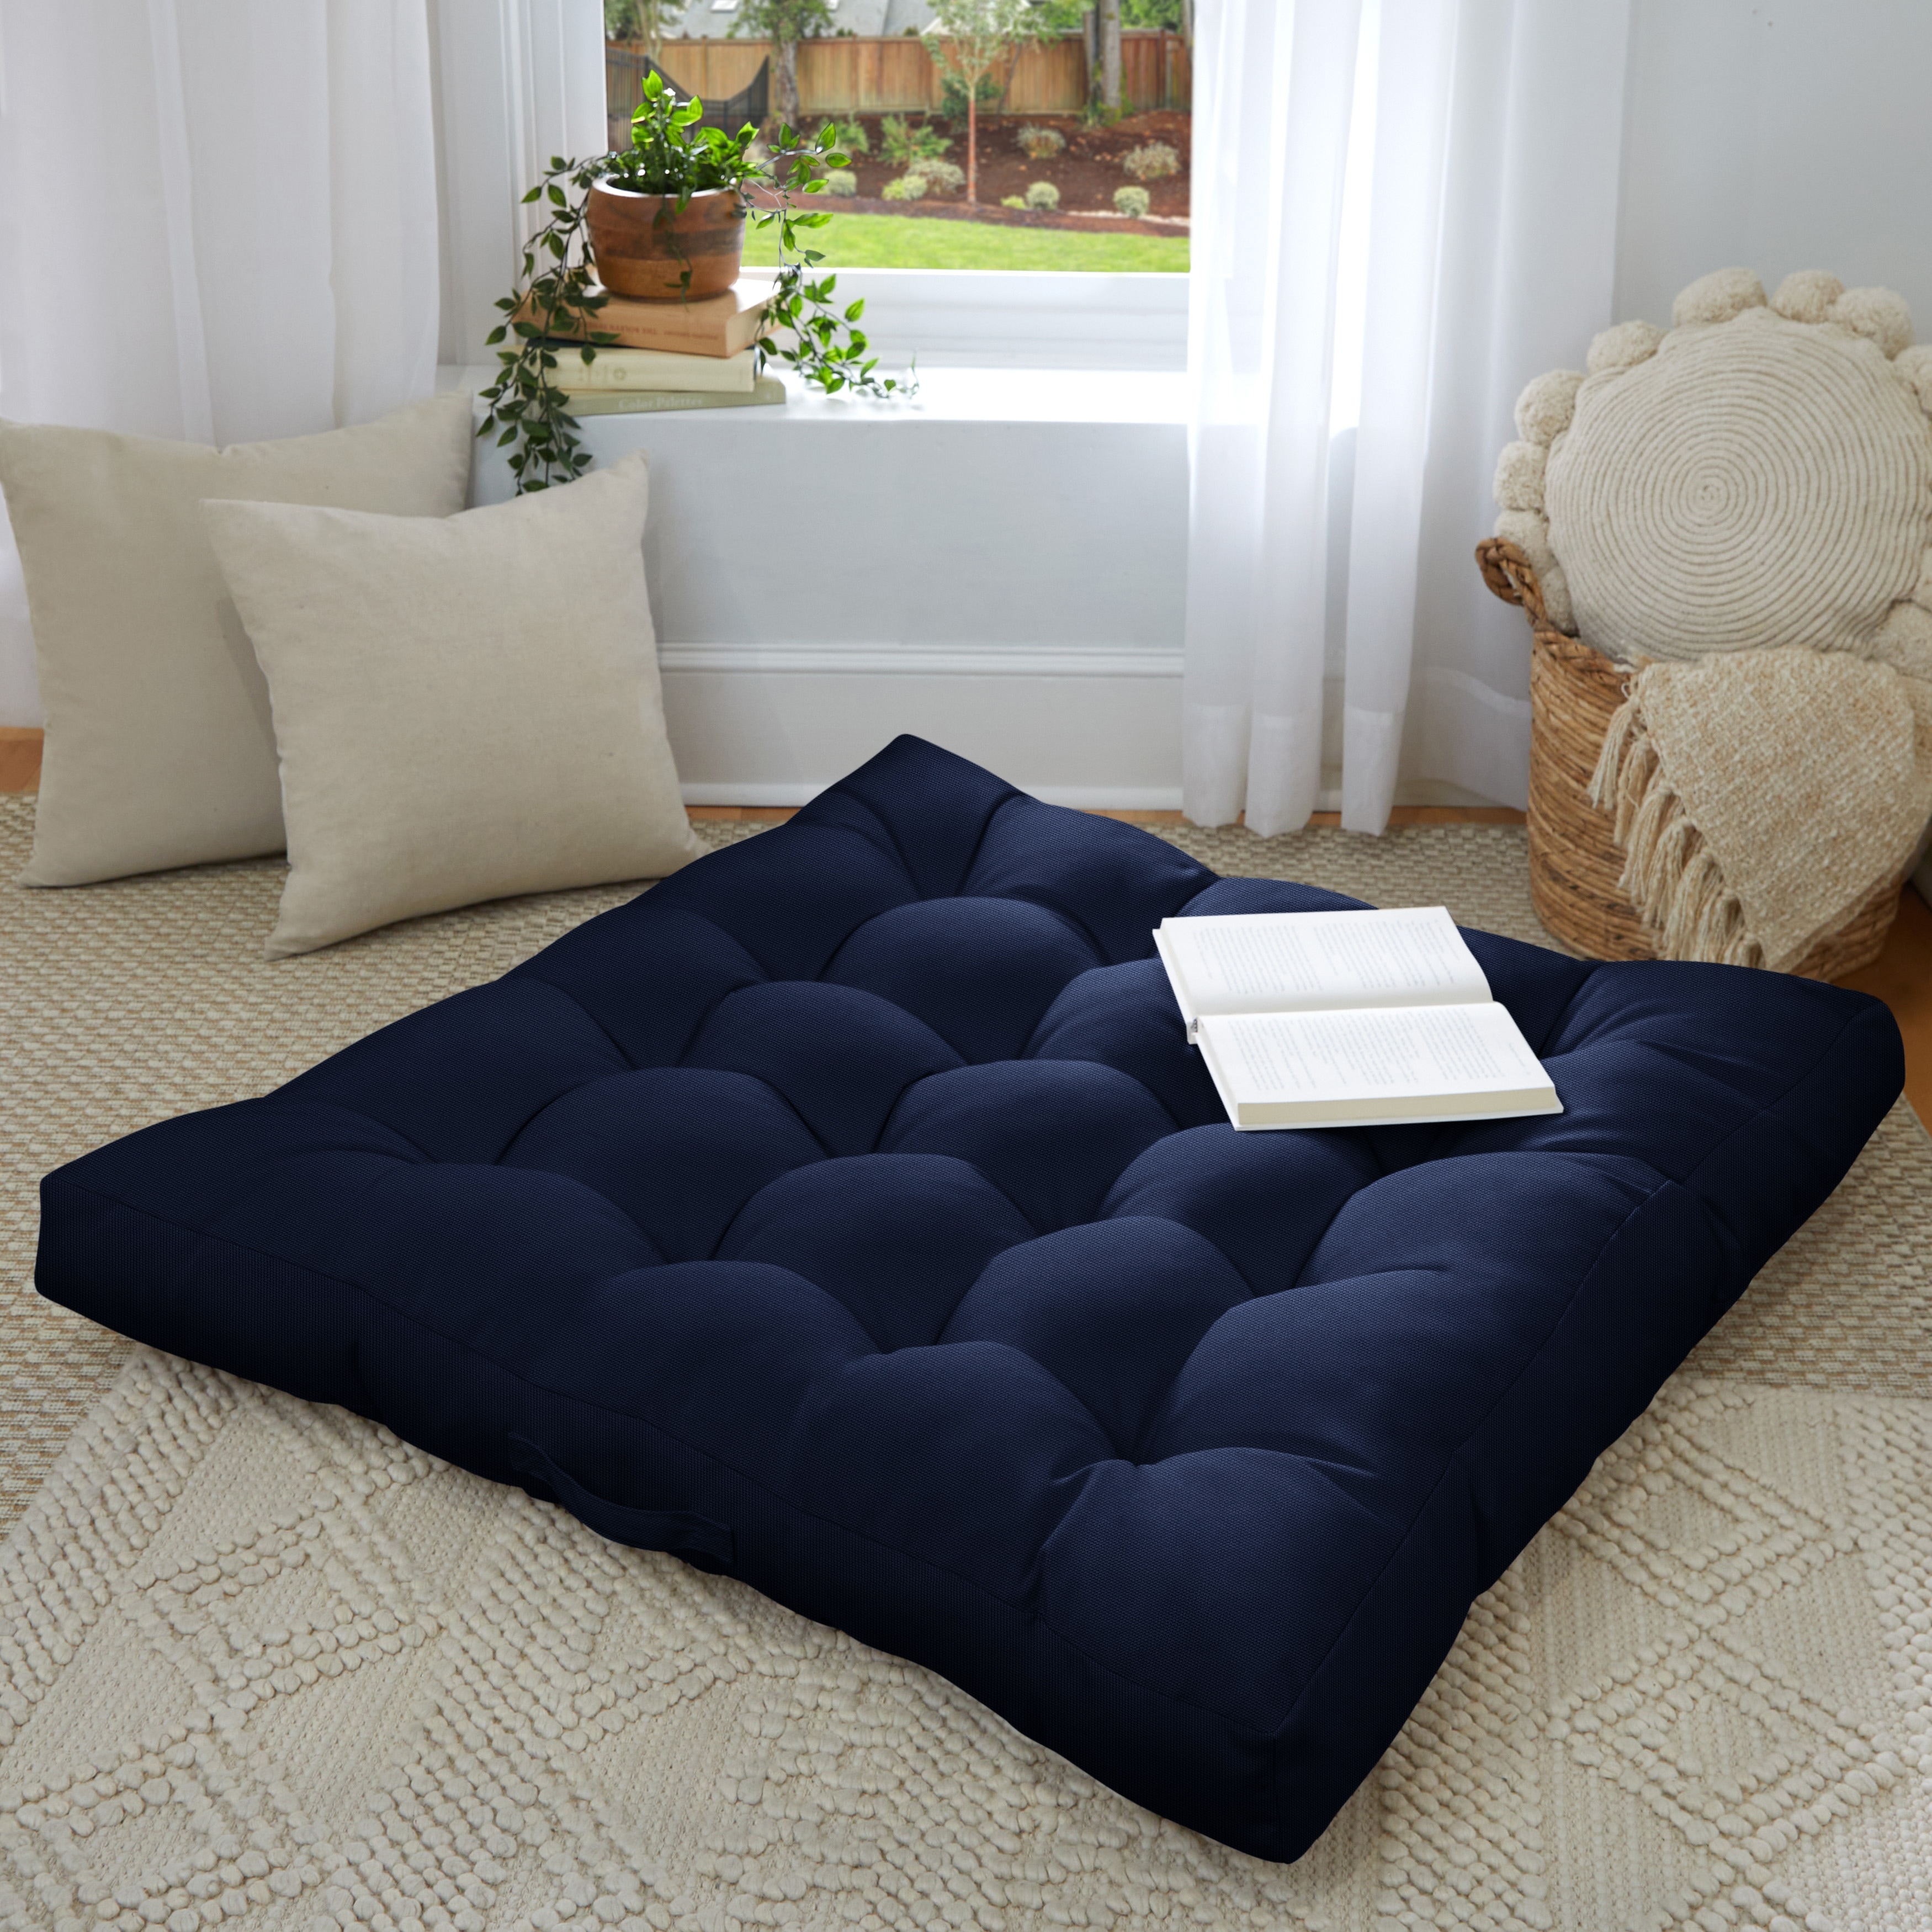 Get Comfy With Floor Cushions And Serenity Will Follow